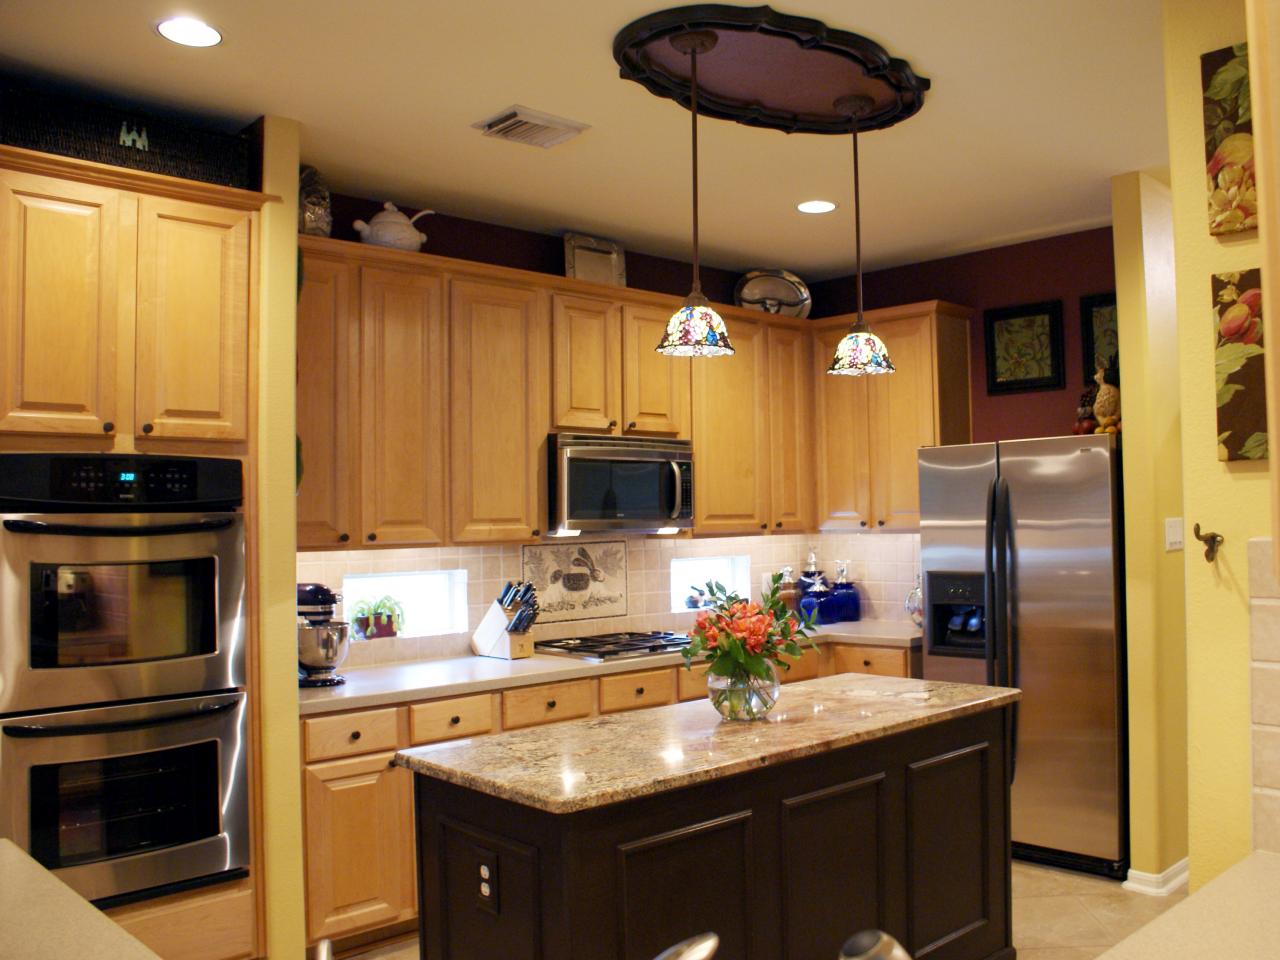 Cabinets Should You Replace Or Reface, Average Cost To Change Kitchen Cabinet Doors